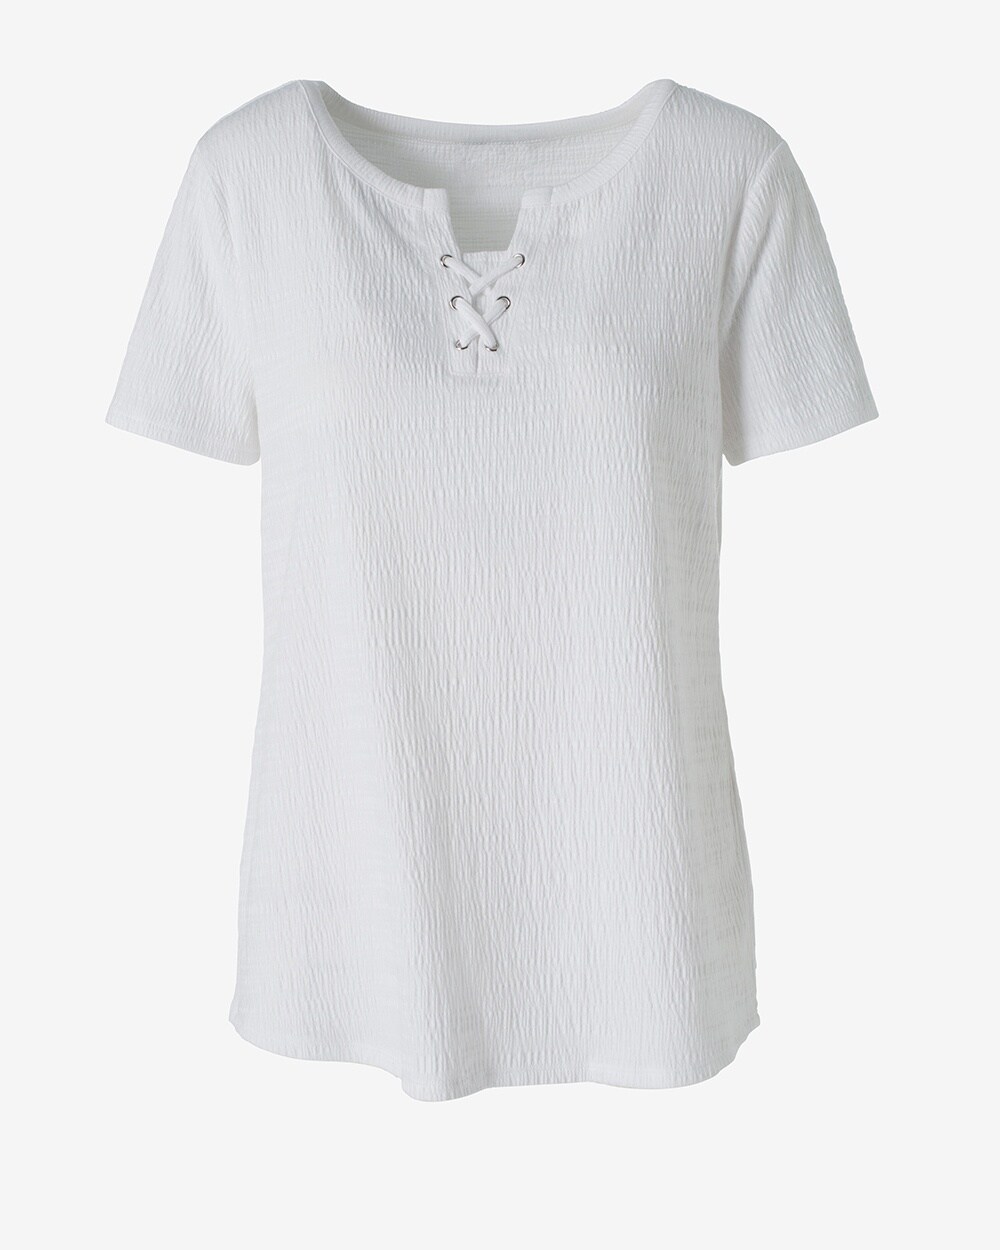 Lace-Up Textured Tee